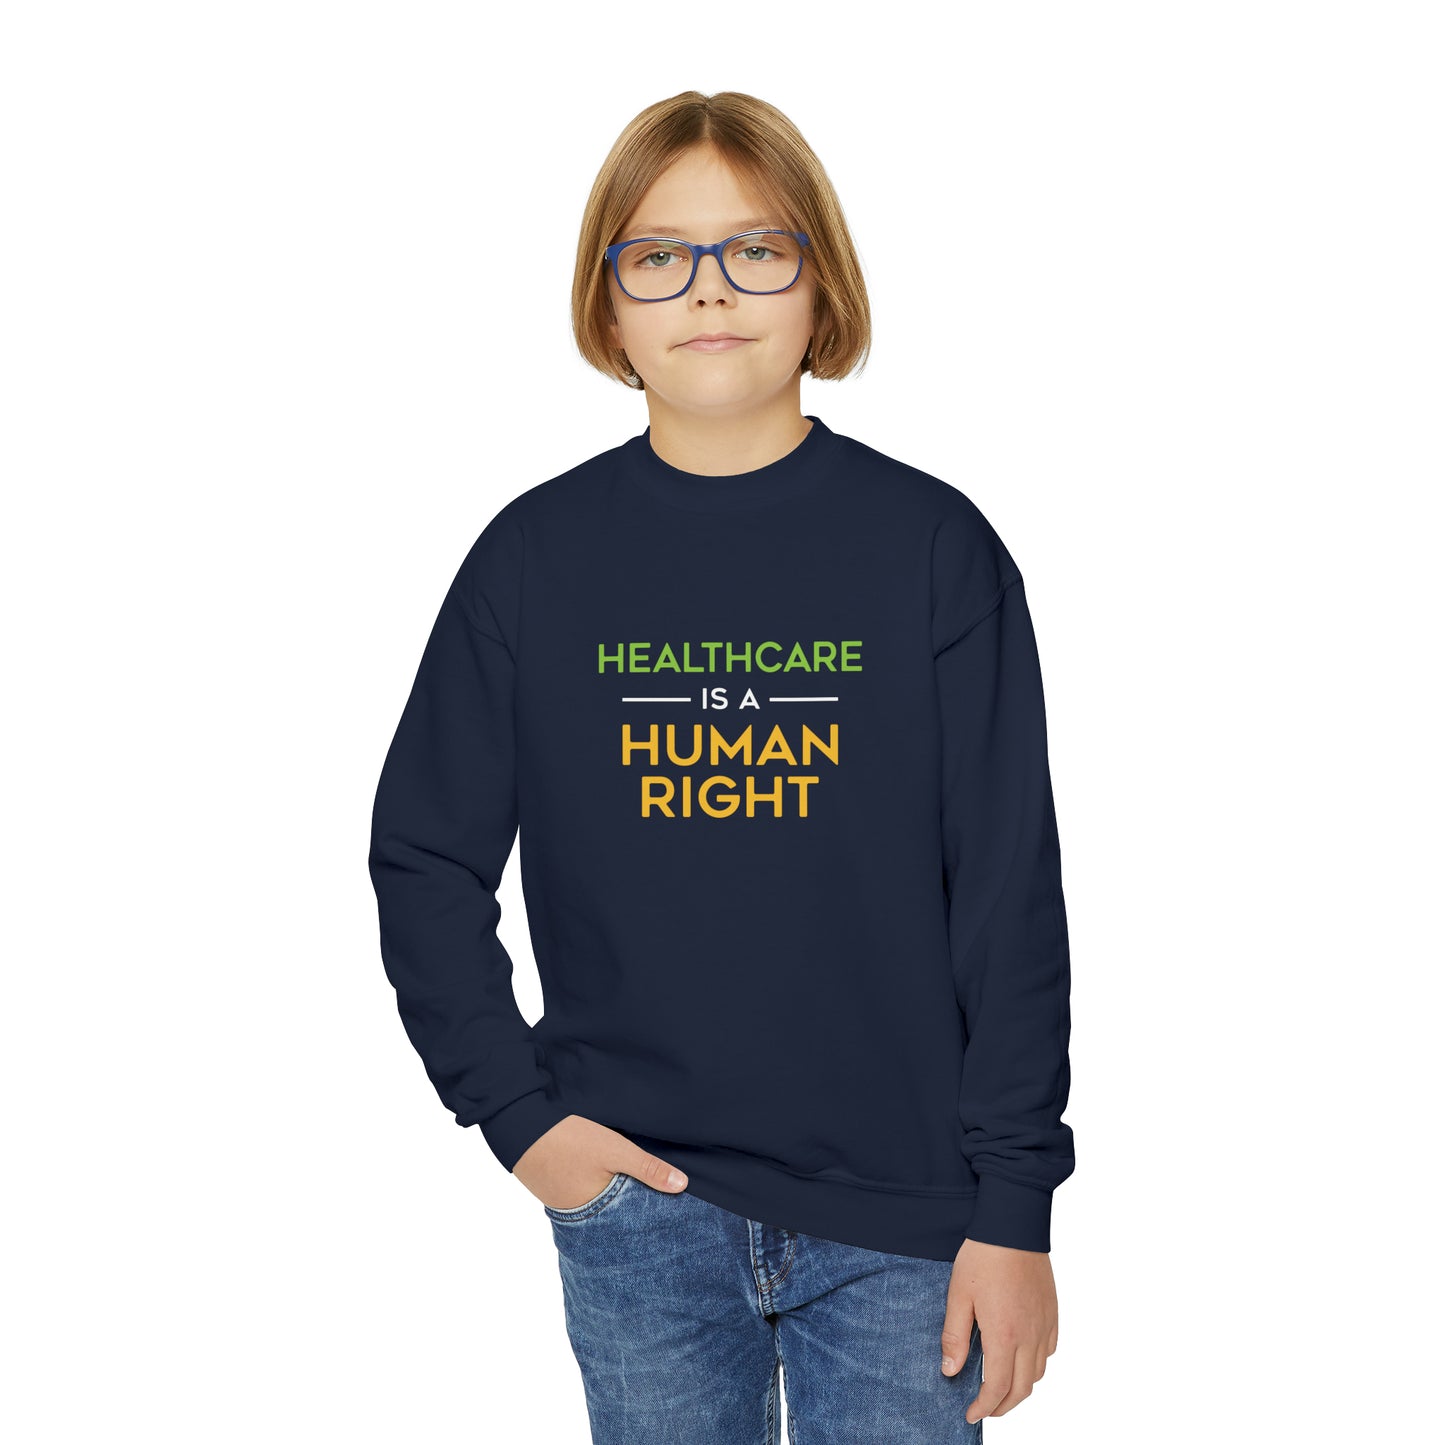 “Healthcare Is A Human Right” Youth Sweatshirt